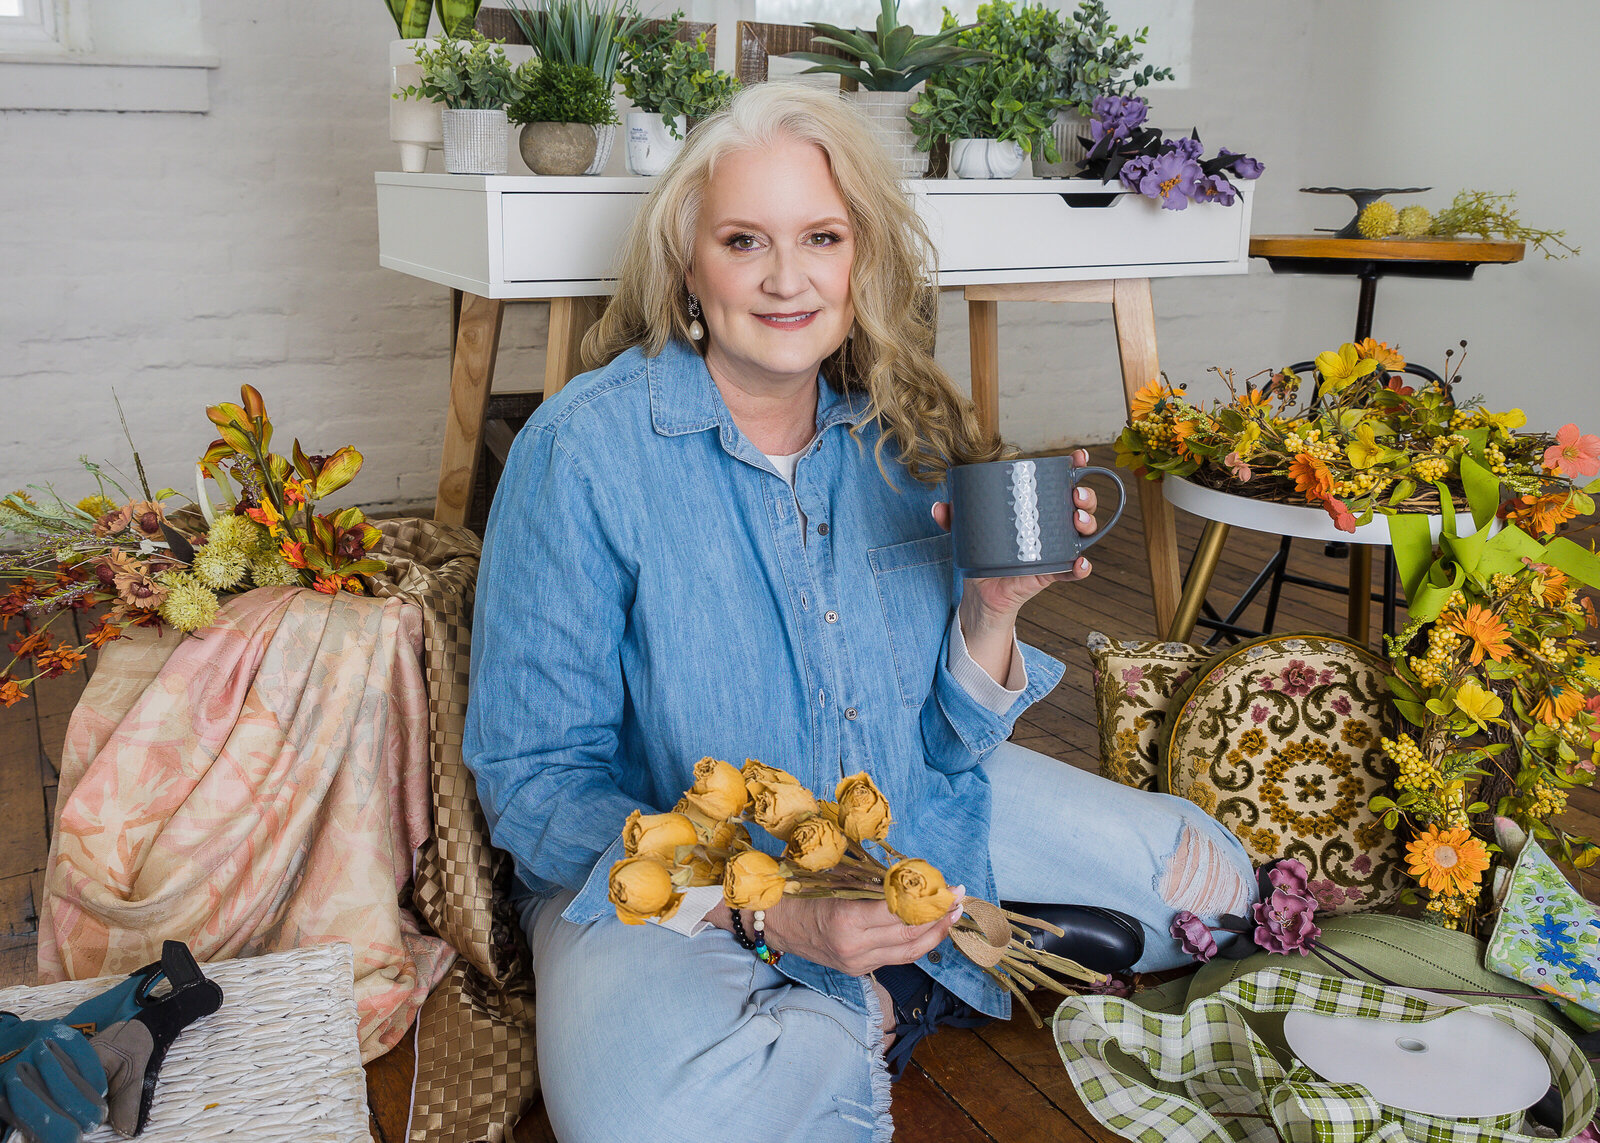 woman sitting surrounded by fake flowers and crafts holding a cup of coffee